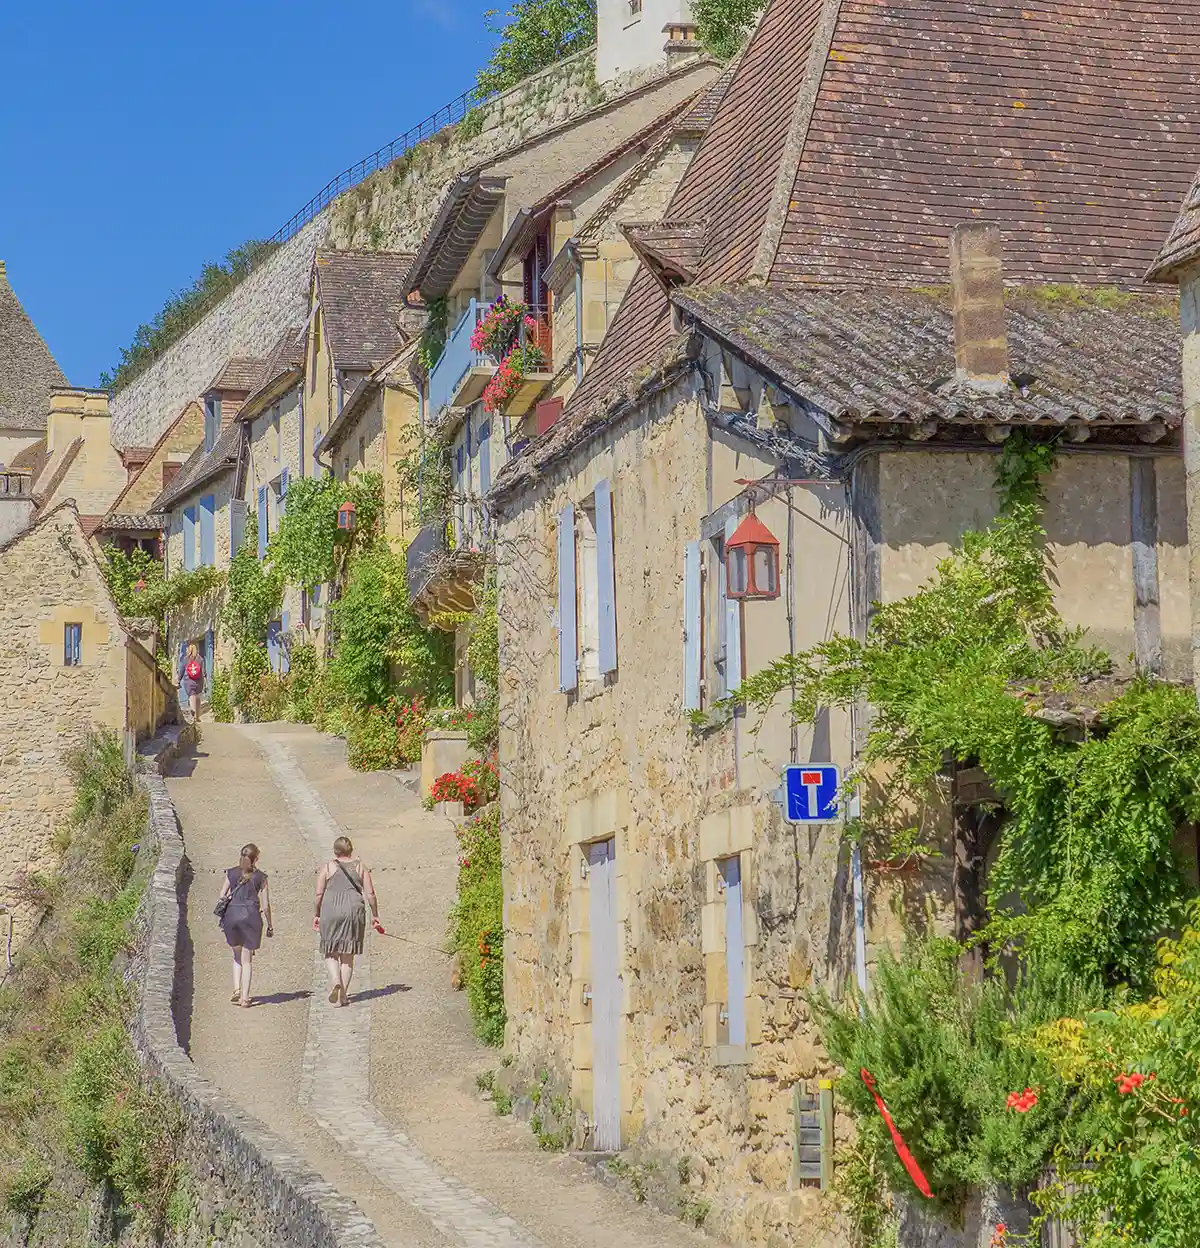 picturesque villages steeped in history